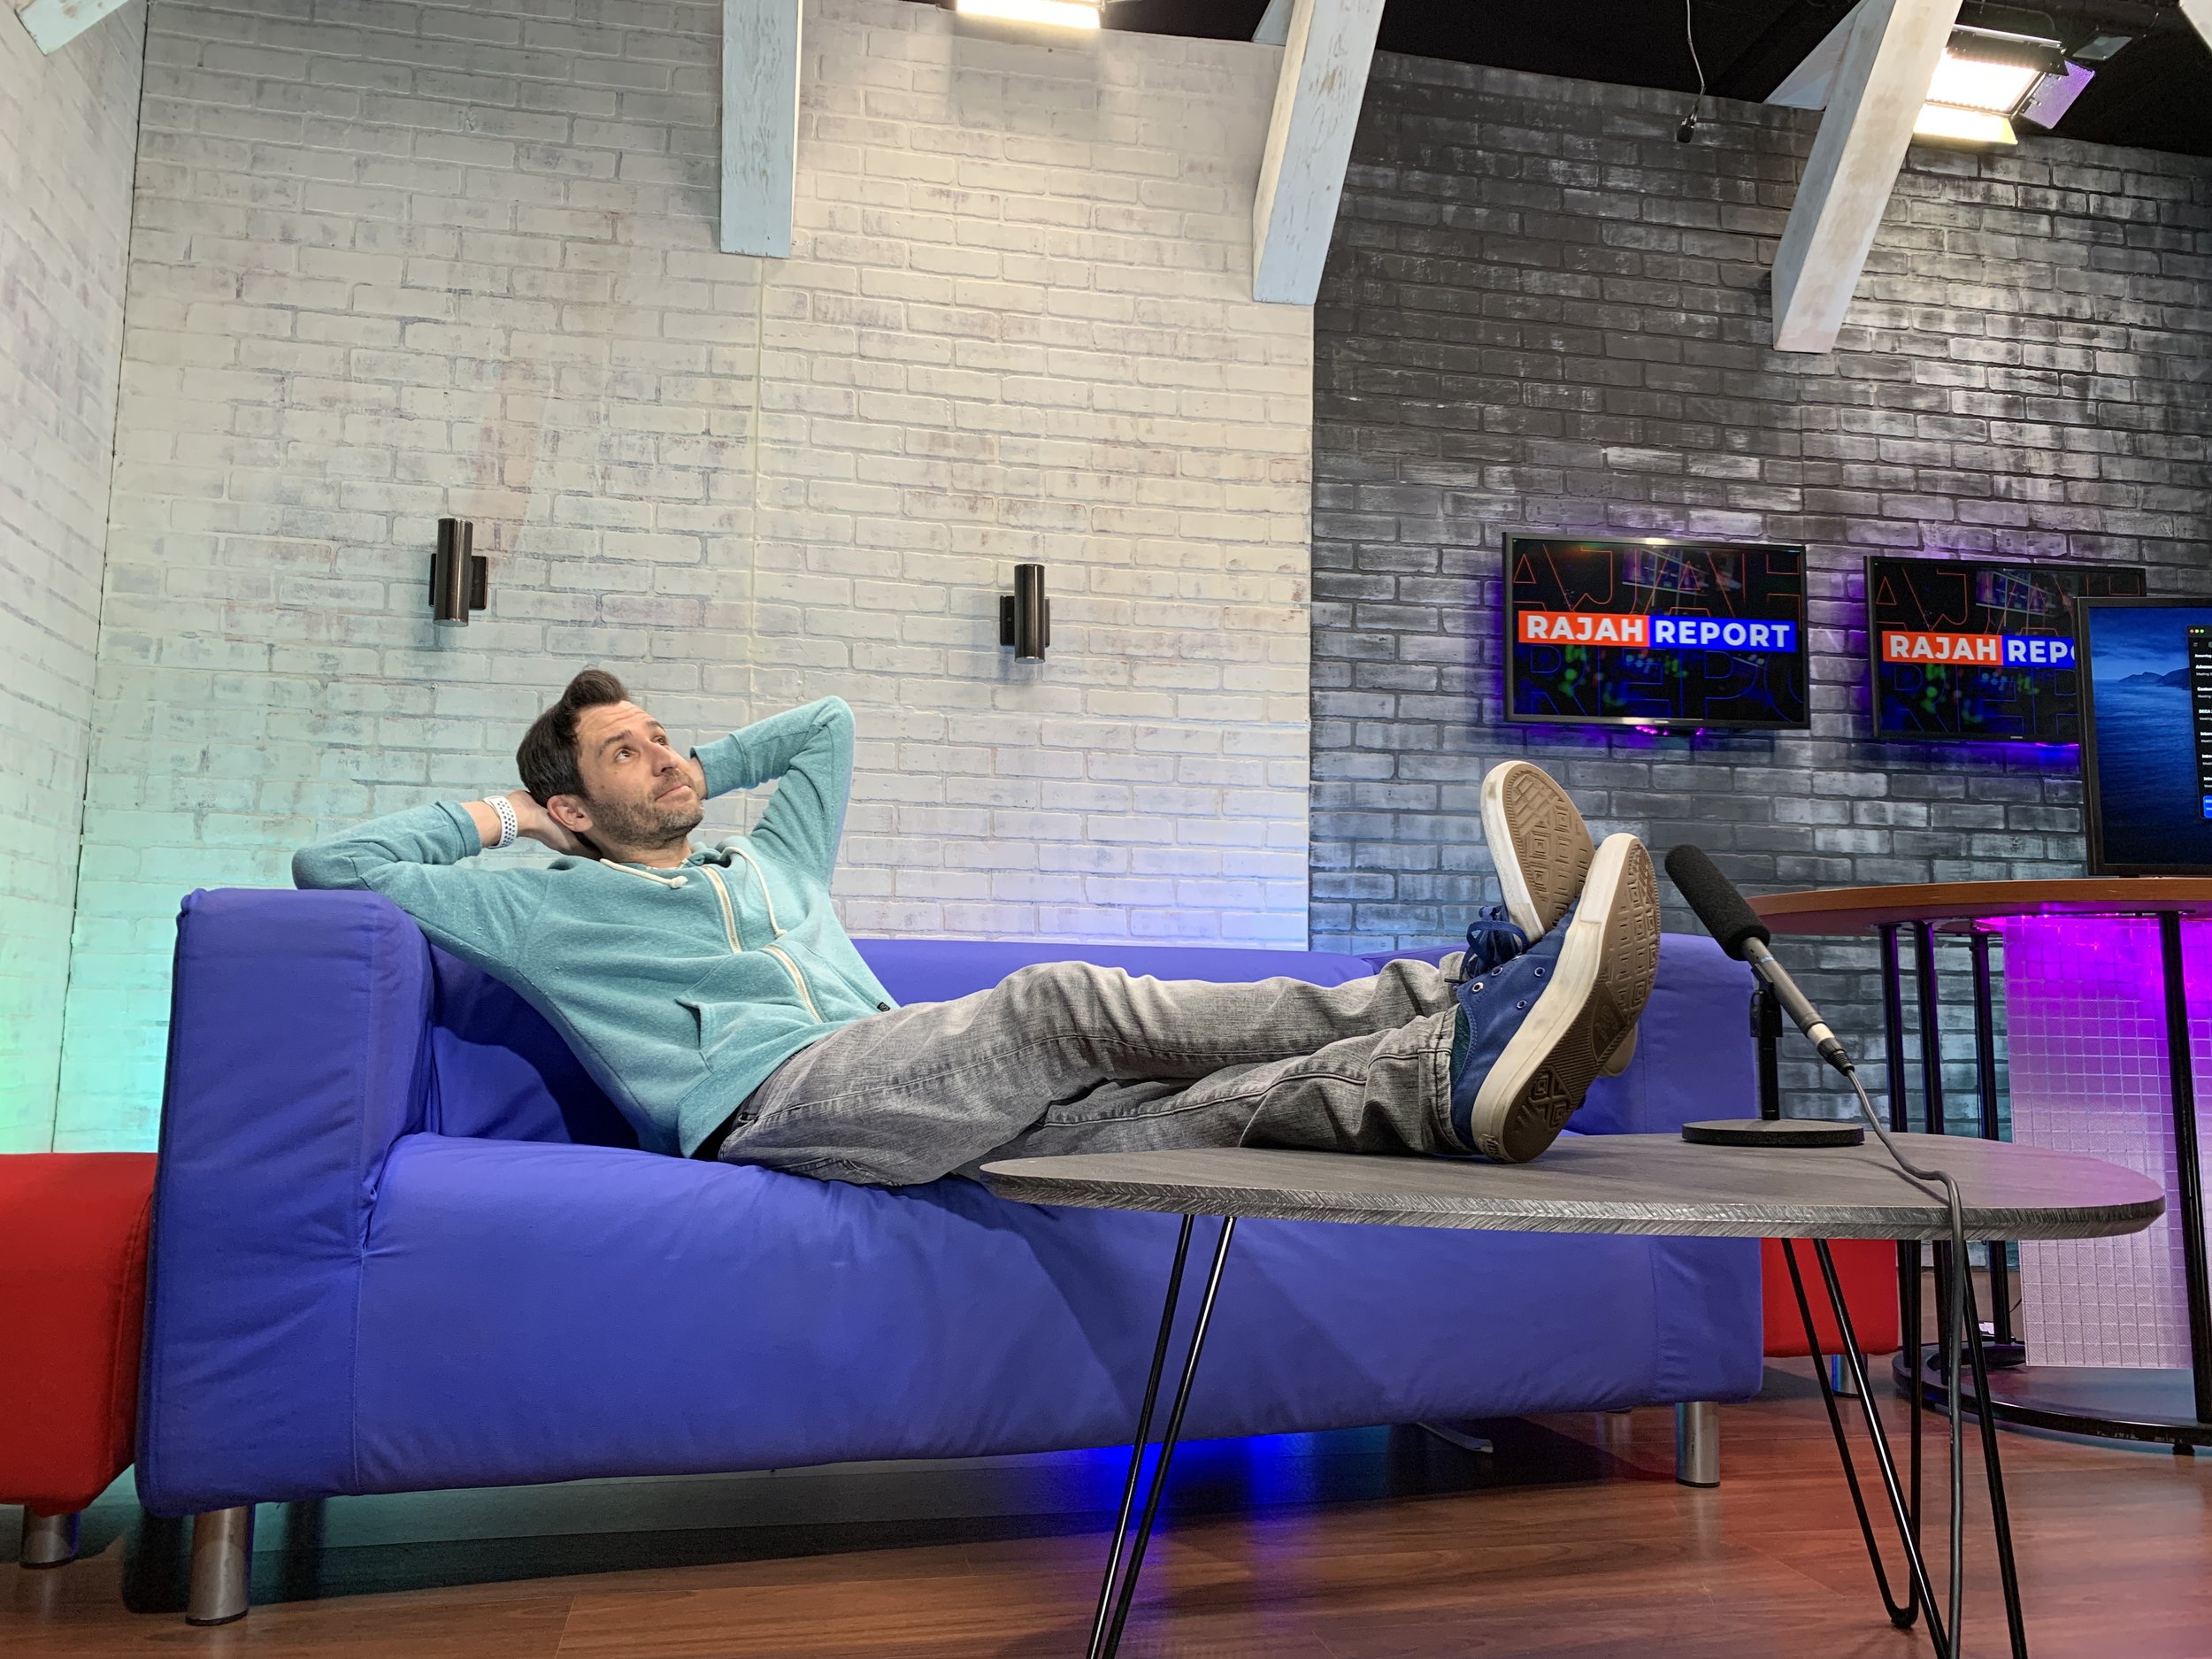  March 18, 2021: this was my last time in the studio (normally I’d never let anyone put feet on the table!). I did my first ever livestream on that couch the day I met my wife. It’s a very special place and leaving was the definition of bittersweet. 